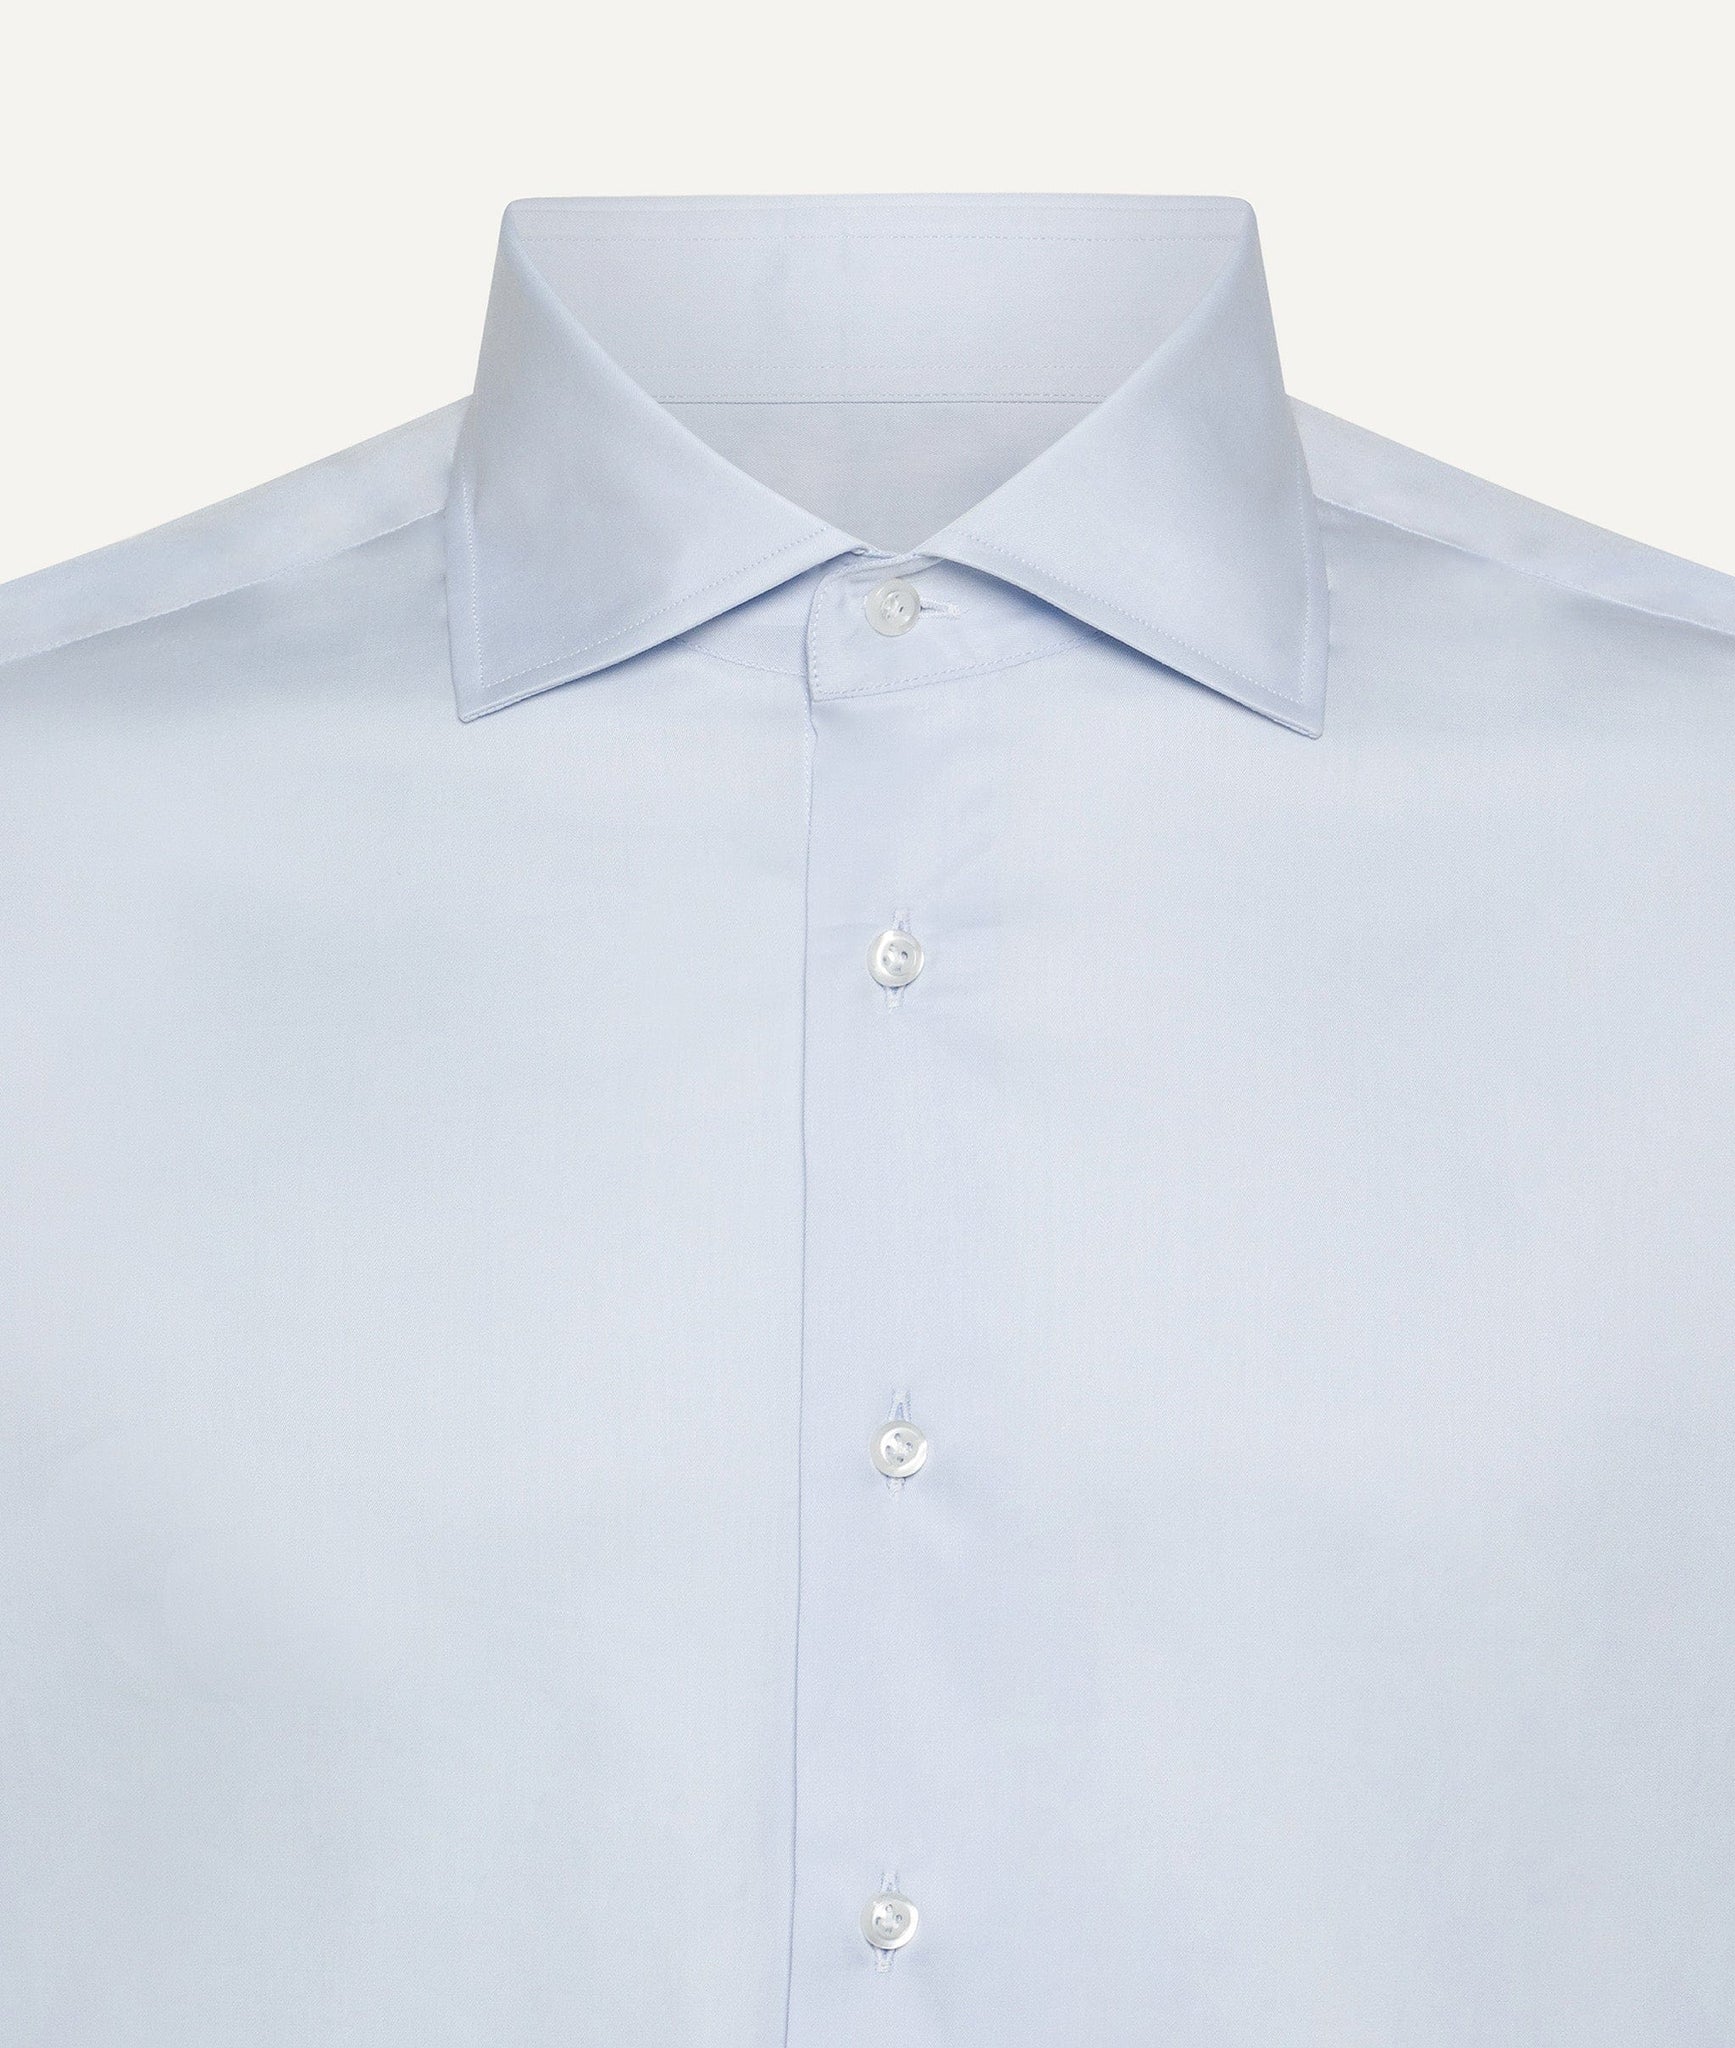 Classic Twill Shirt in Cotton